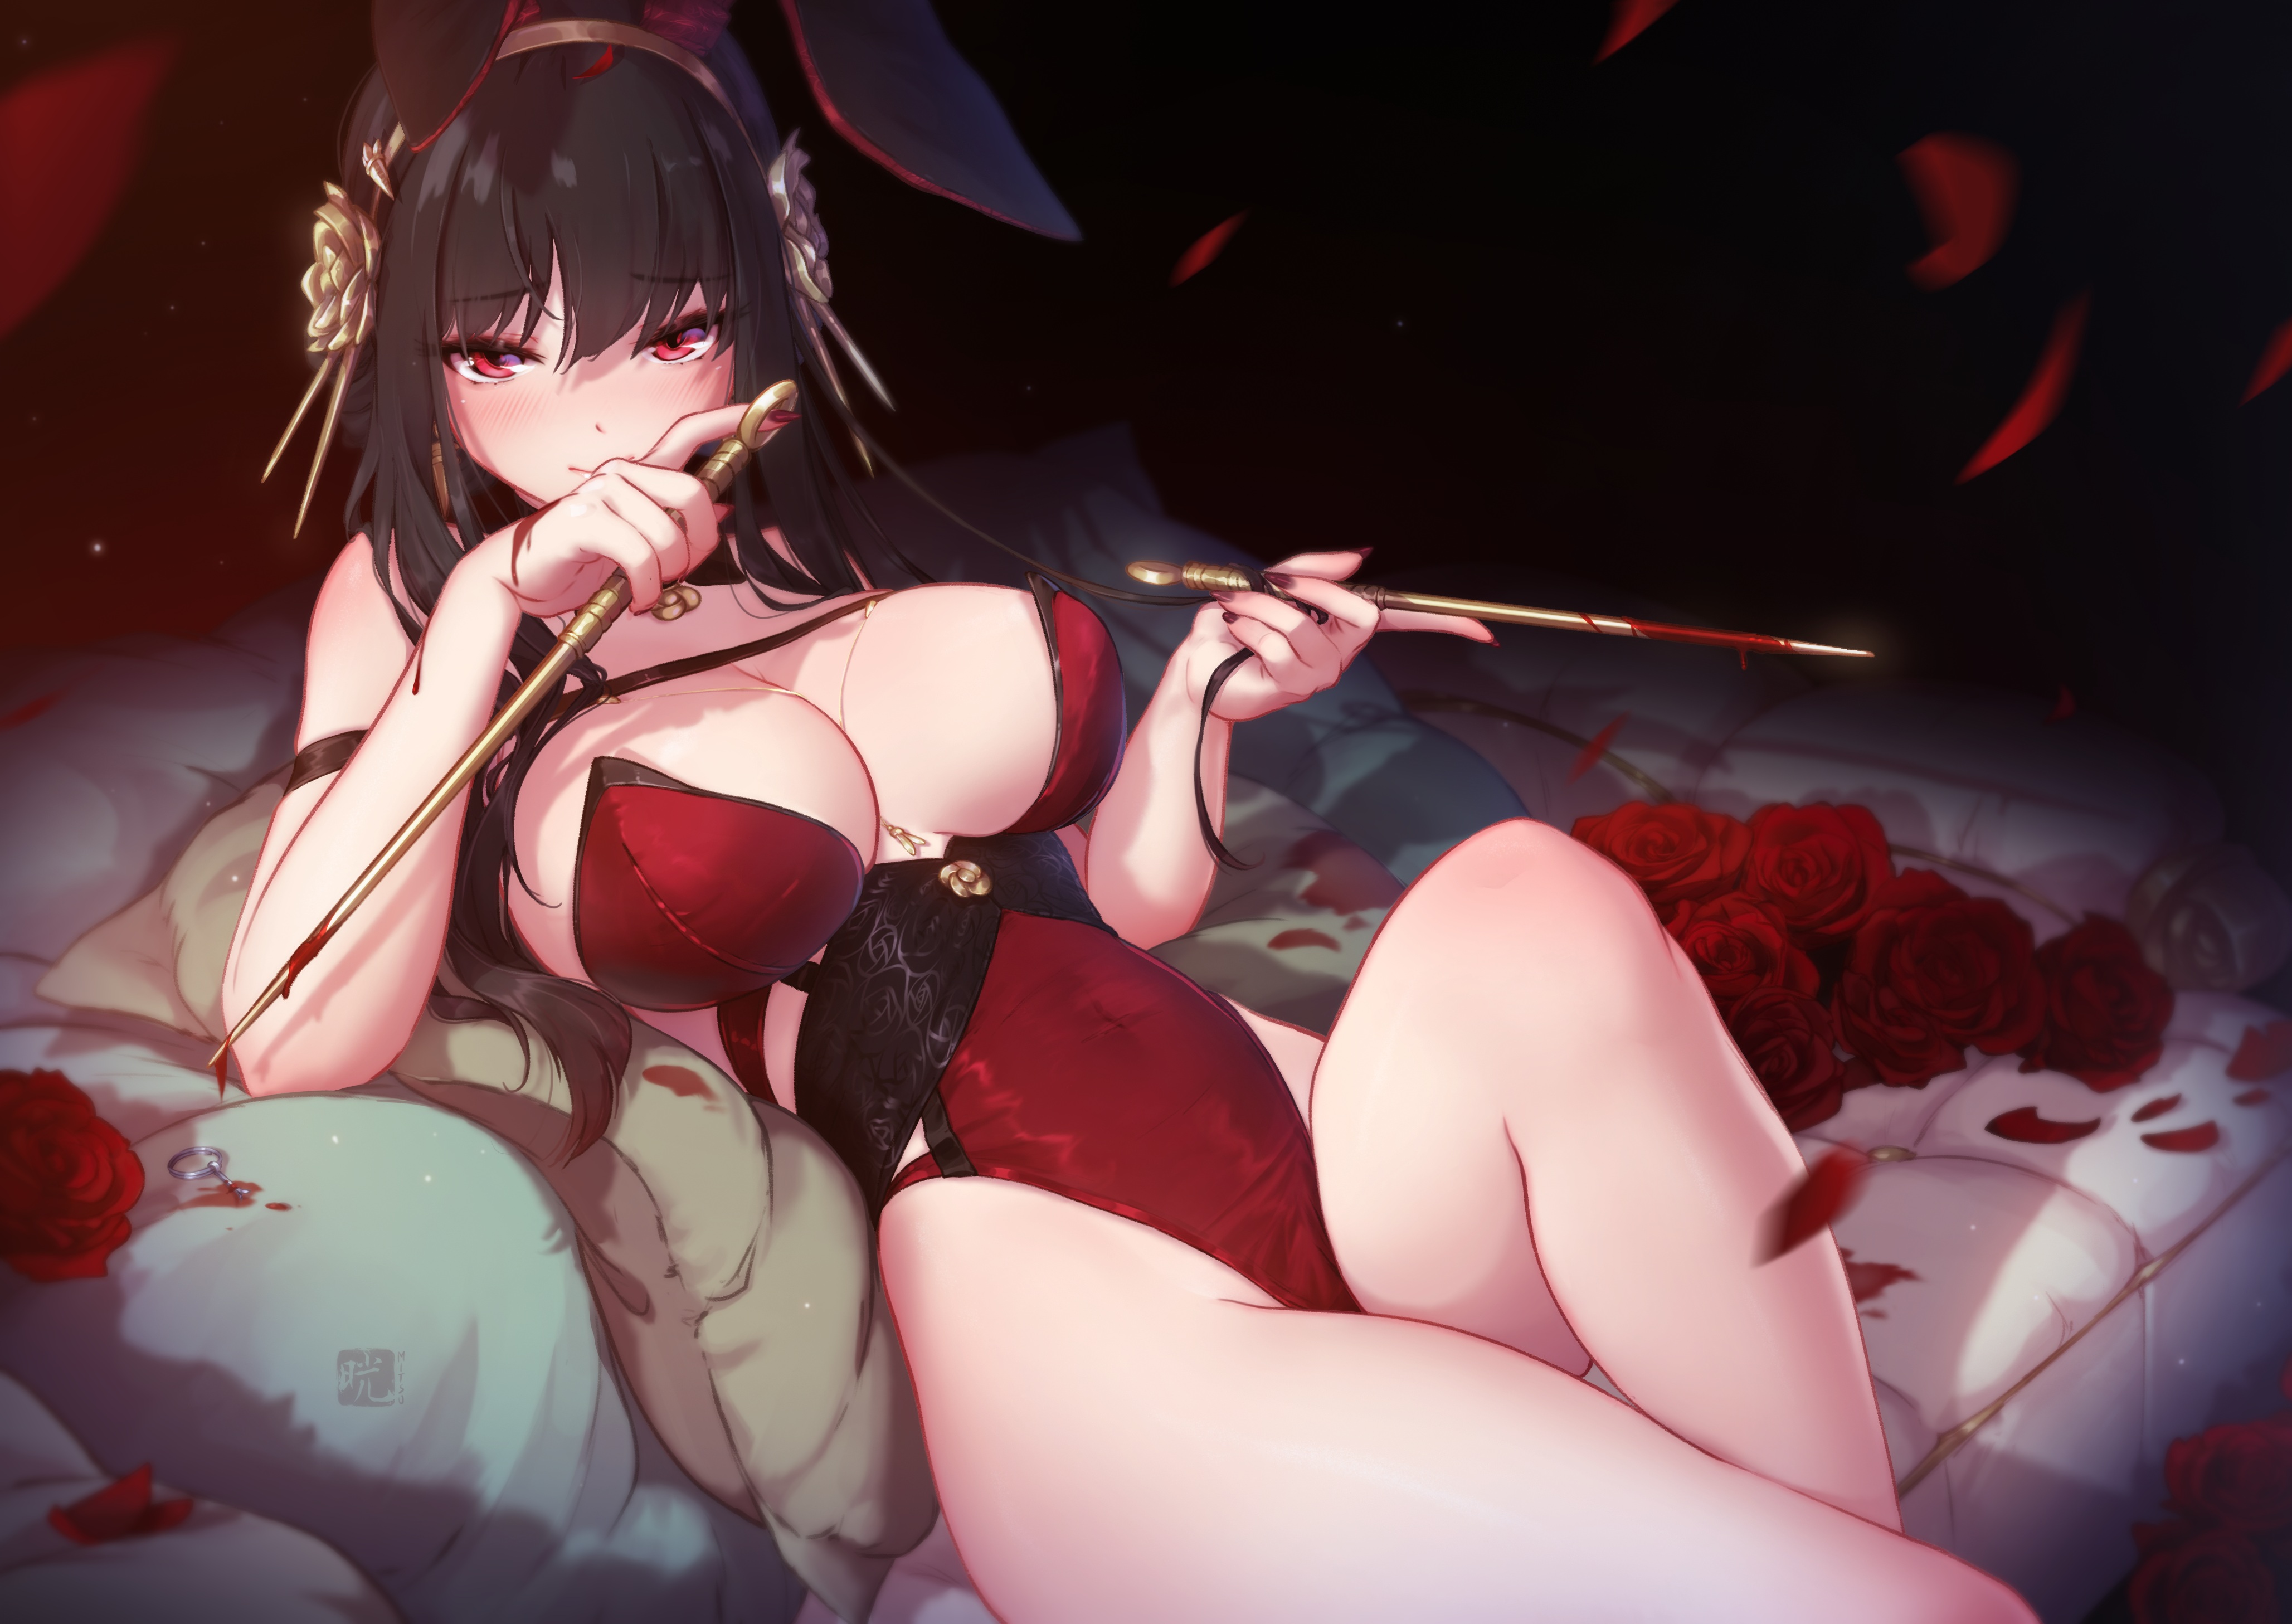 Anime 4113x2914 anime anime girls big boobs black hair red eyes rose petals flowers bunny girl bunny suit bunny ears blushing blood thighs pillow lying on back low neckline Spy x Family Yor Forger Mitsu